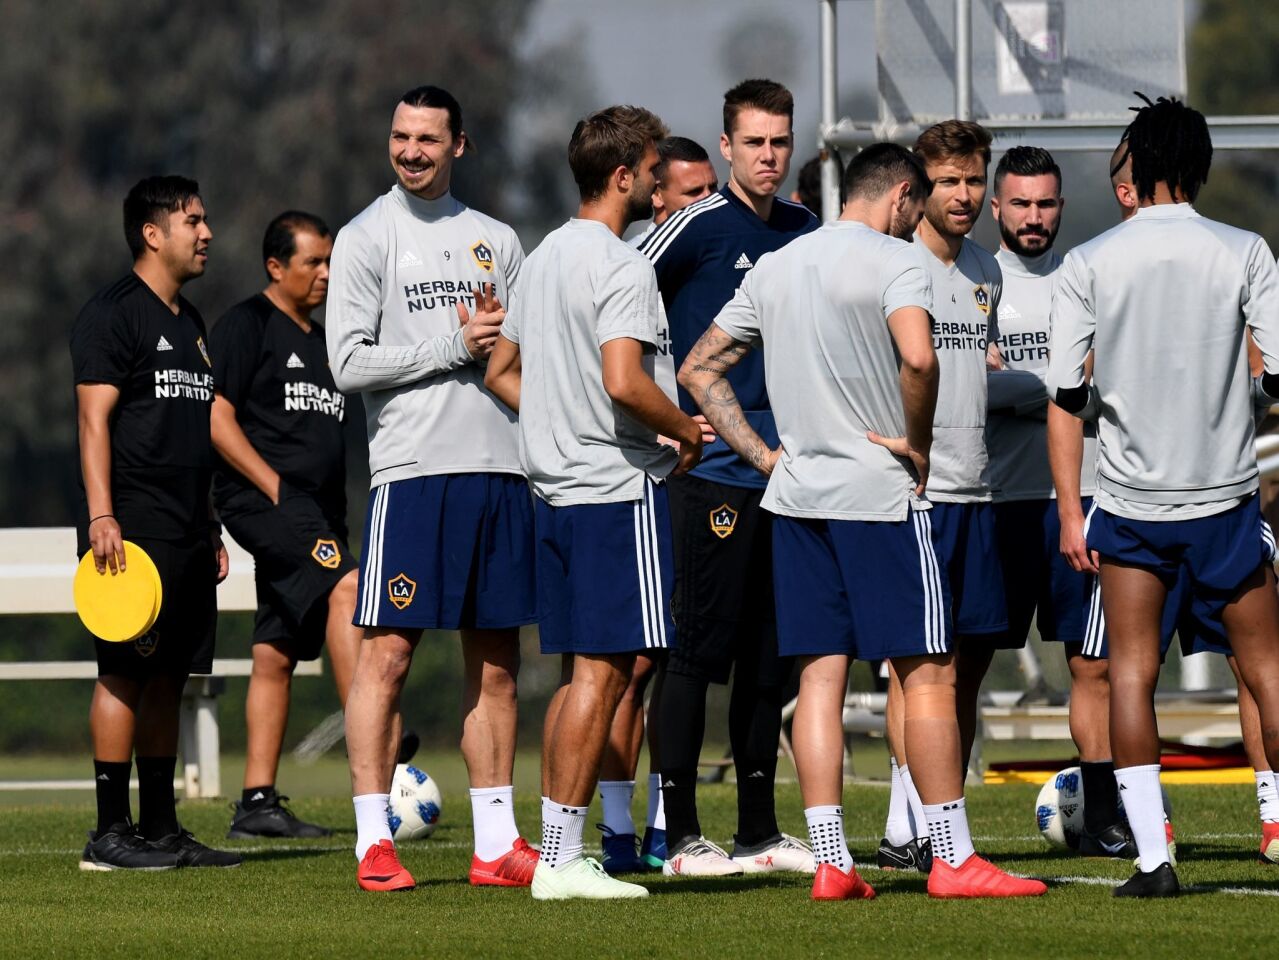 Football star Zlatan Ibrahimovic (3rd L) at his first training session for his new club LA Galaxy in Los Angeles, California, on March 30, 2018. The 36-year-old Swedish striker's move to MLS from Manchester United was confirmed last week, with Ibrahimovic swiftly vowing to reignite the Galaxy's fortunes after they finished bottom of the league last season. / AFP PHOTO / Mark RalstonMARK RALSTON/AFP/Getty Images ** OUTS - ELSENT, FPG, CM - OUTS * NM, PH, VA if sourced by CT, LA or MoD **